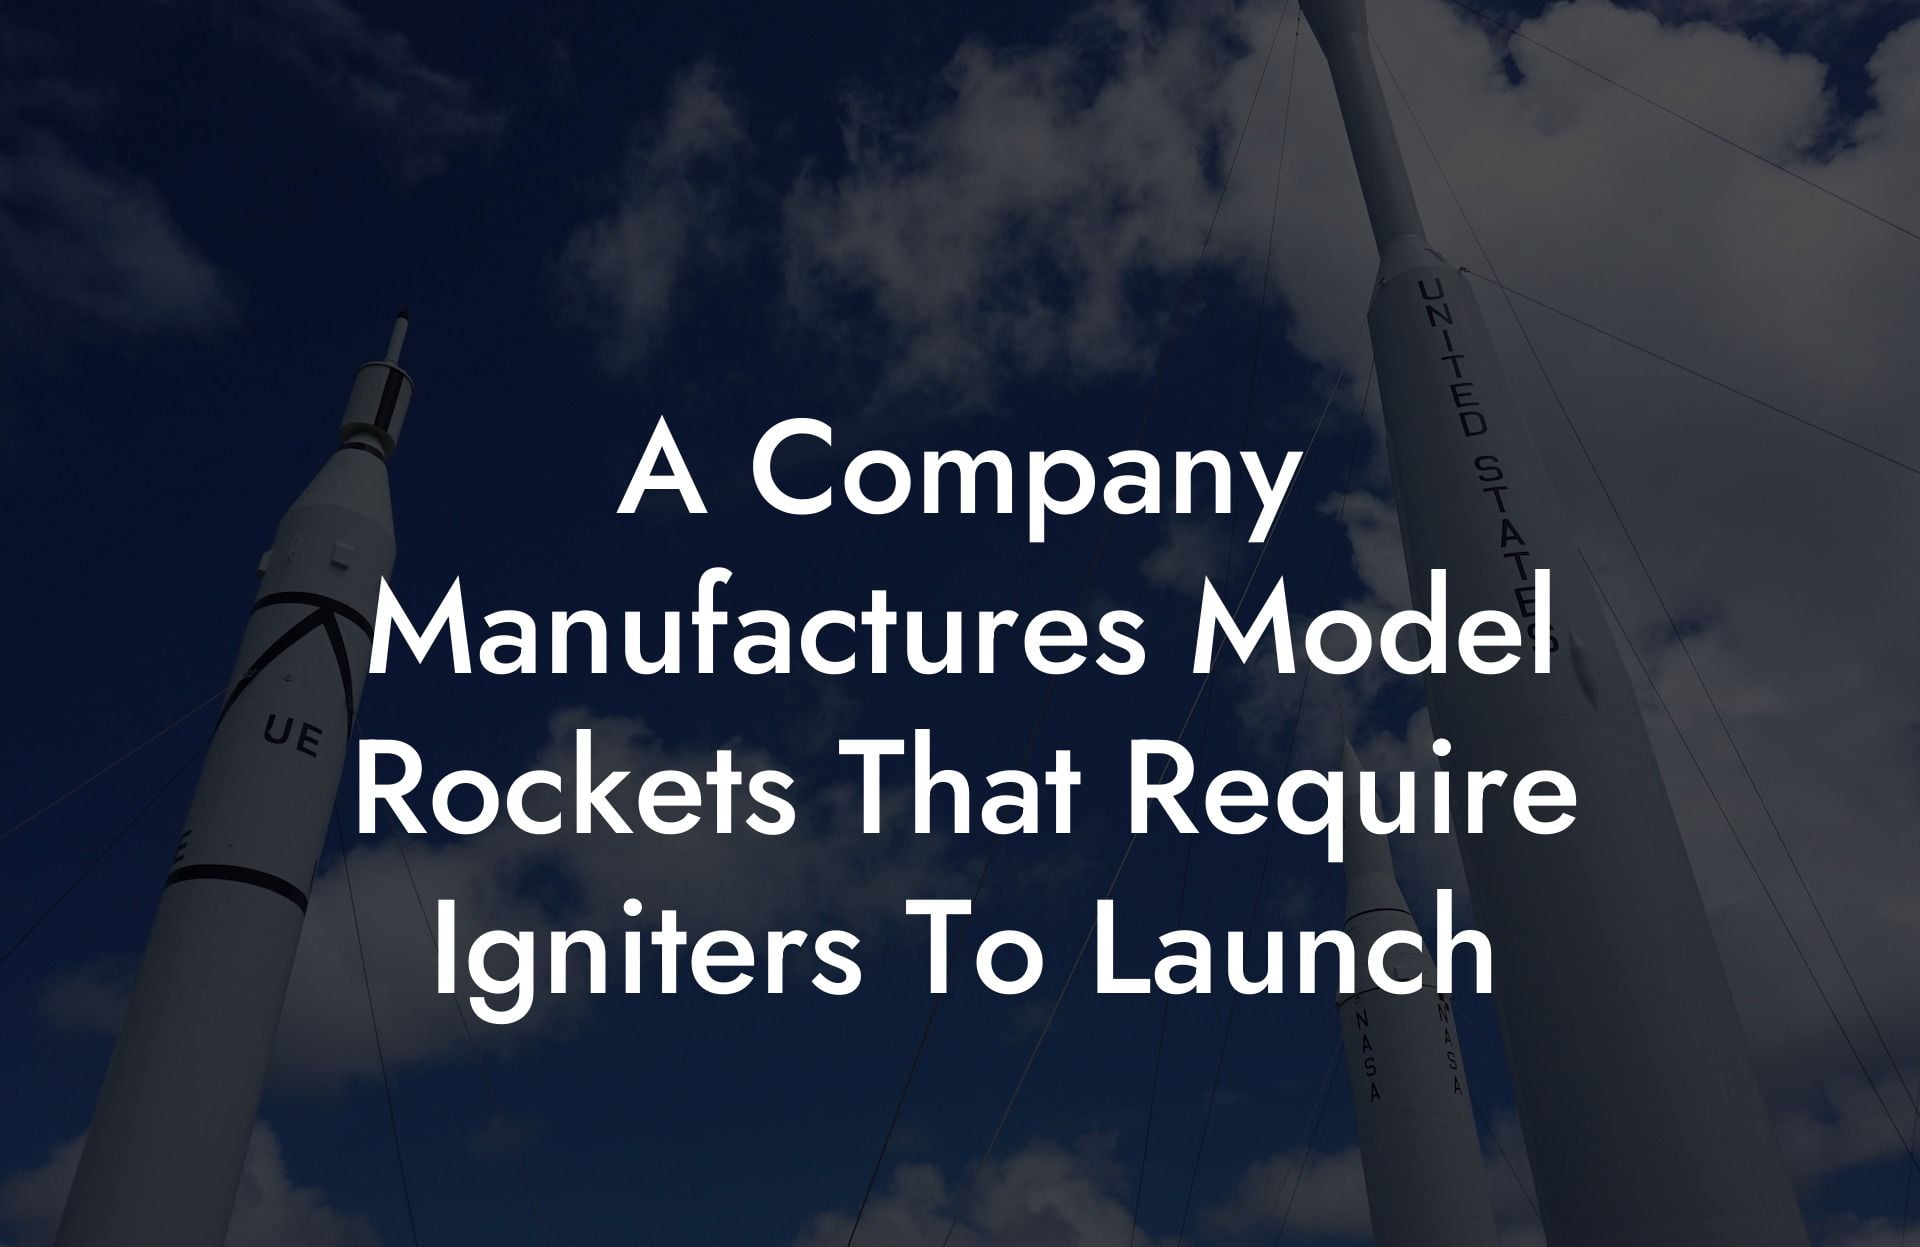 A Company Manufactures Model Rockets That Require Igniters To Launch